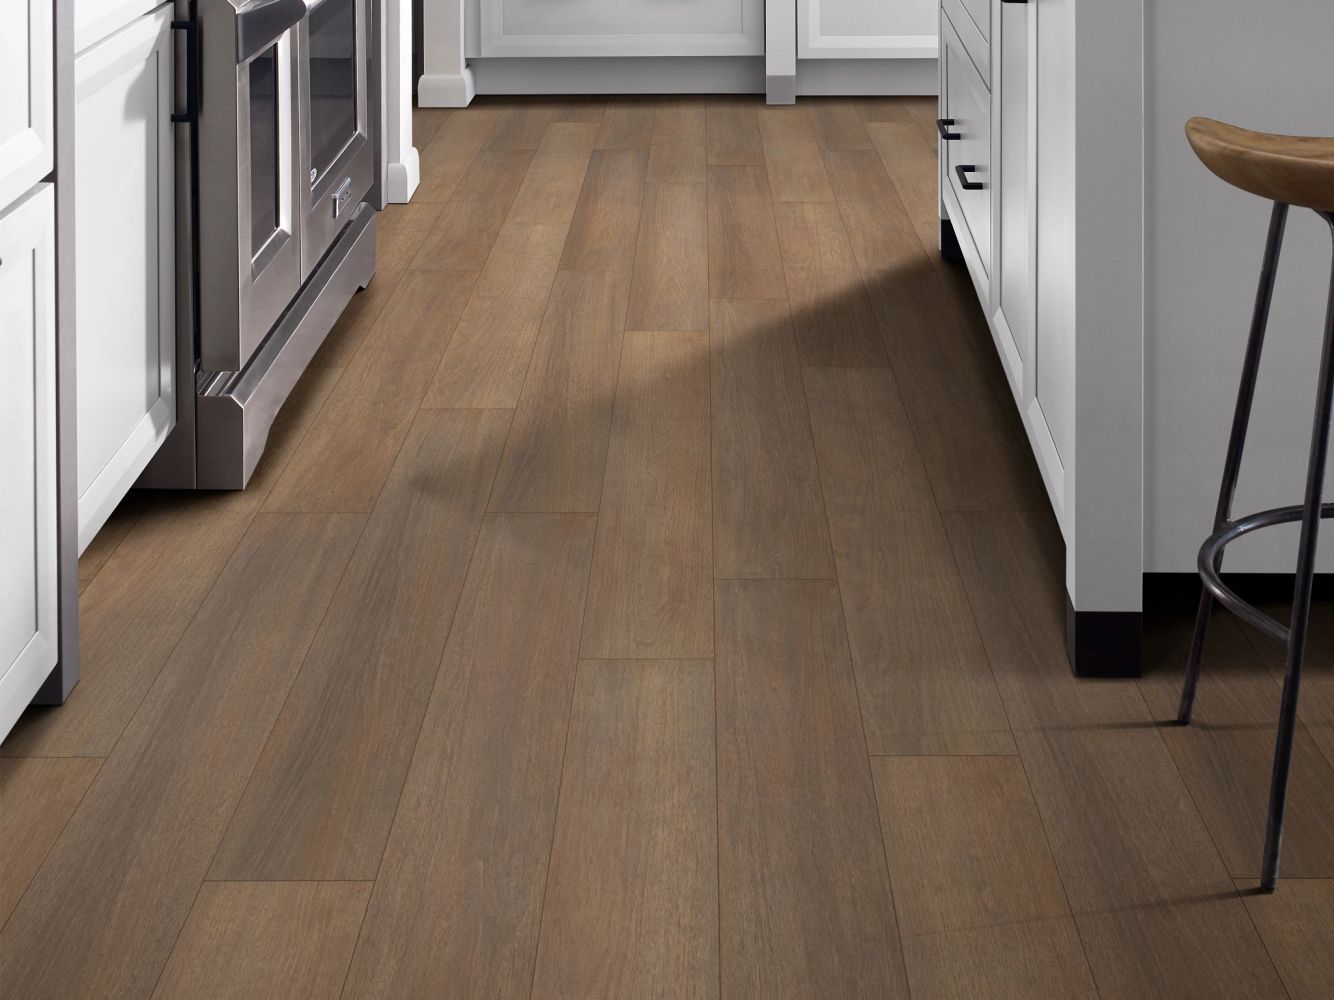 Shaw Floors Resilient Residential Paragon Hd+natural Bevel Gable 07239_3038V